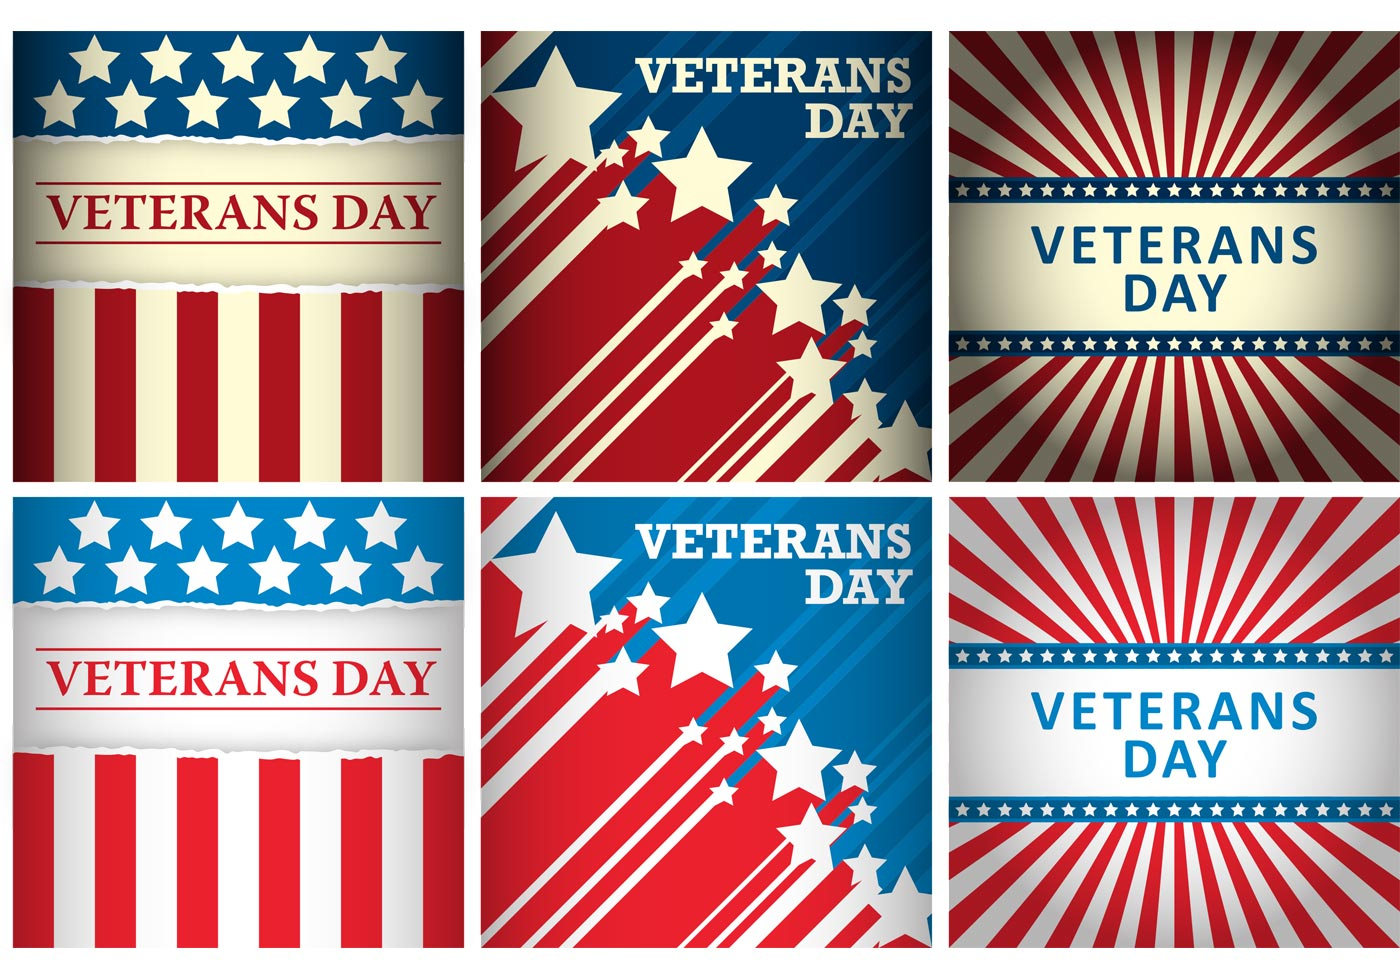 honoring-all-who-served-ecard-free-veterans-day-cards-online